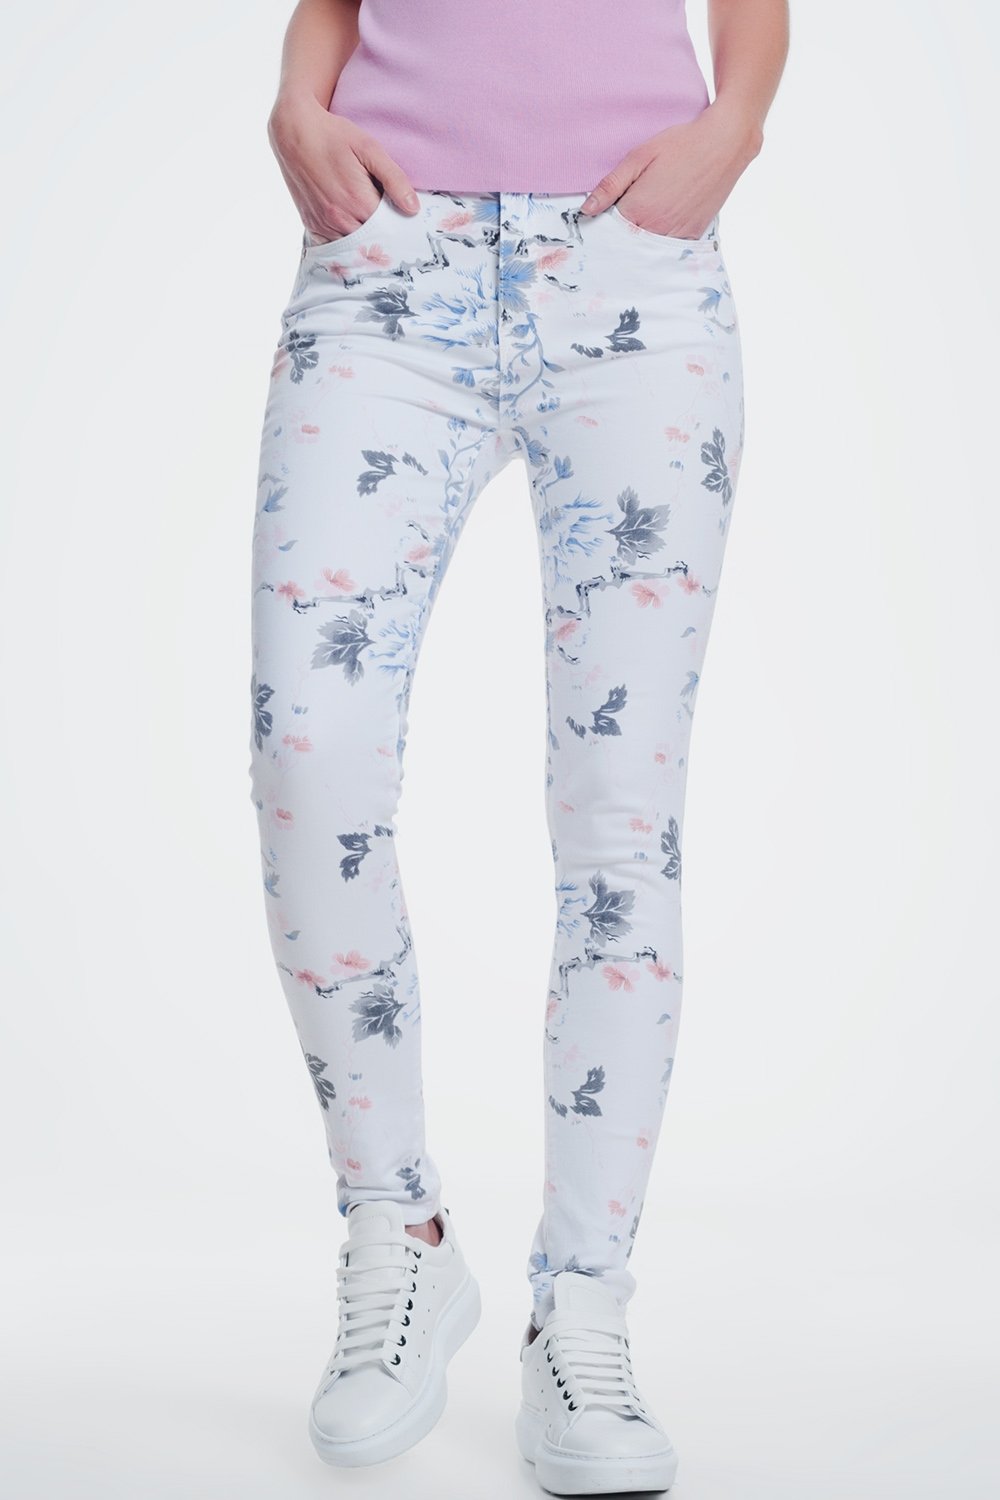 White Skinny Pants With Floral Print